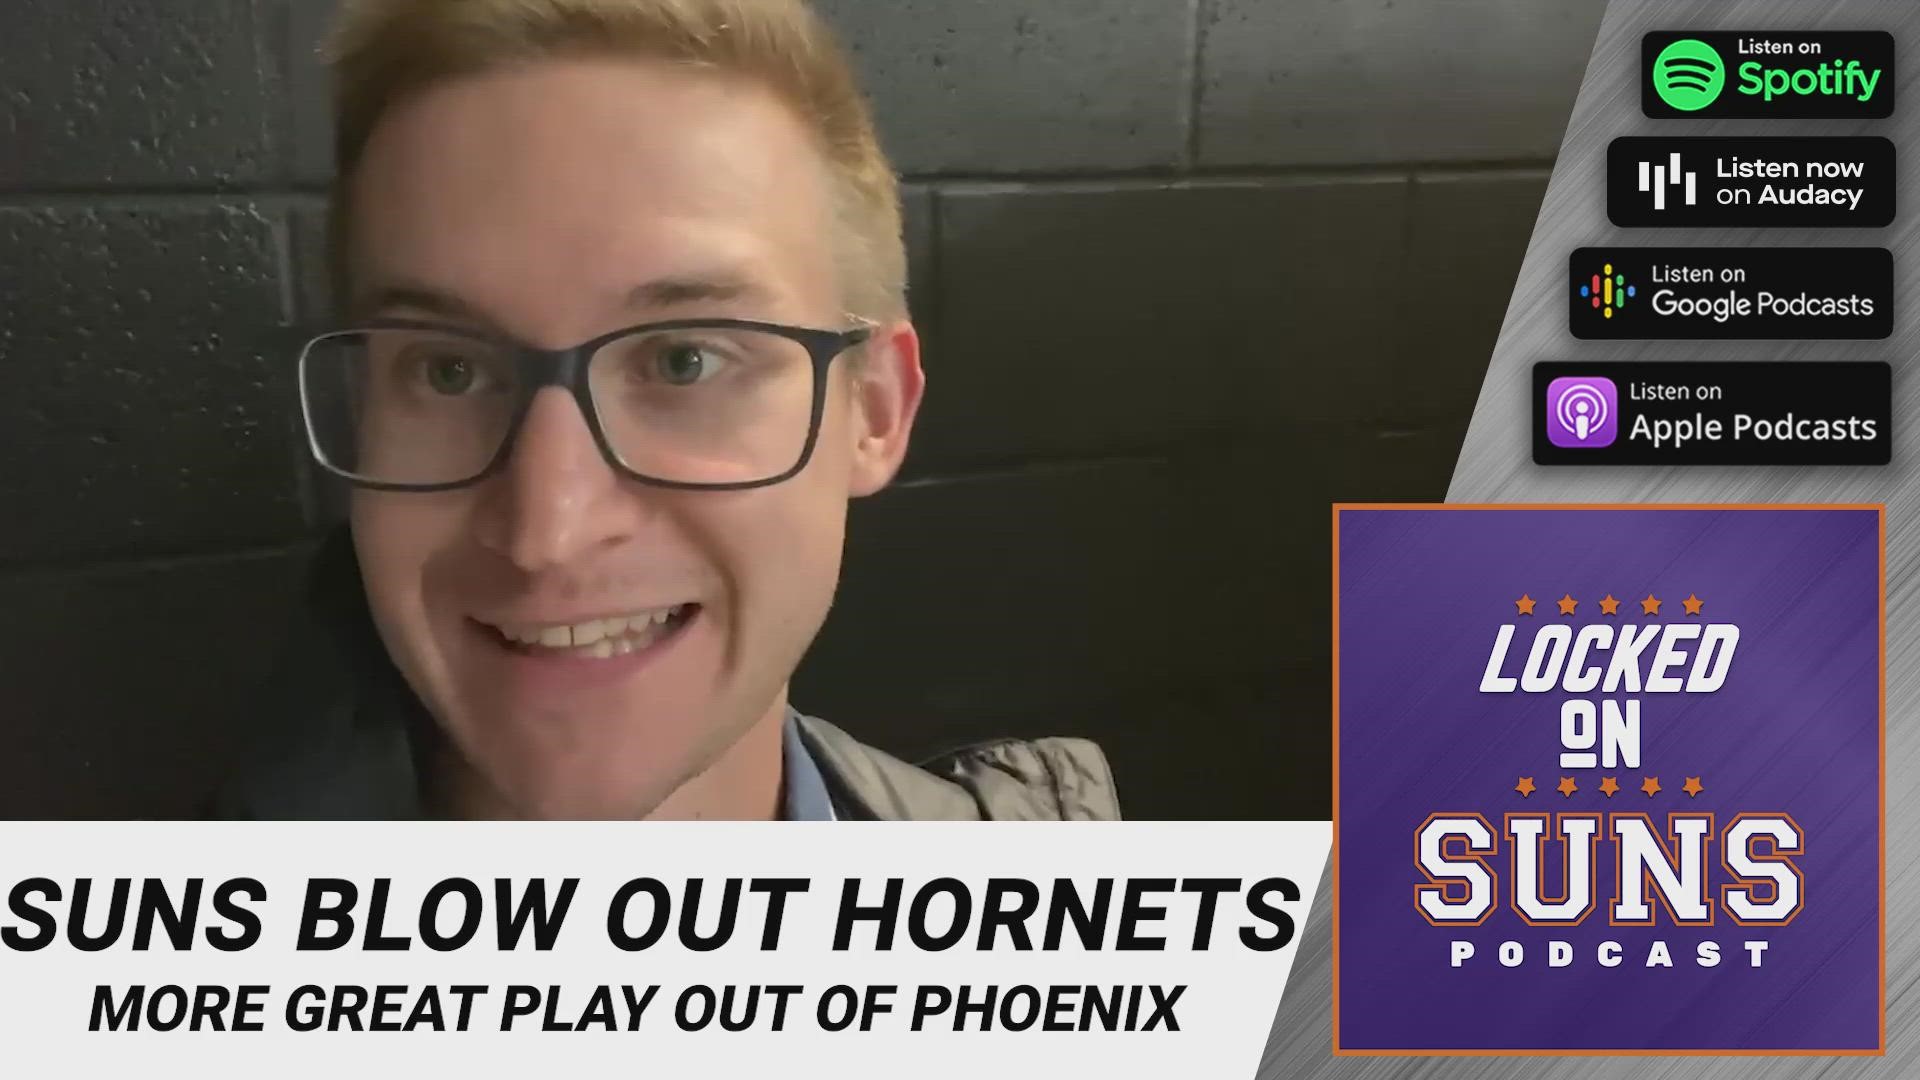 The Phoenix Suns gave a dominating performance at home against the Charlotte Hornets on Sunday. Here's a recap.